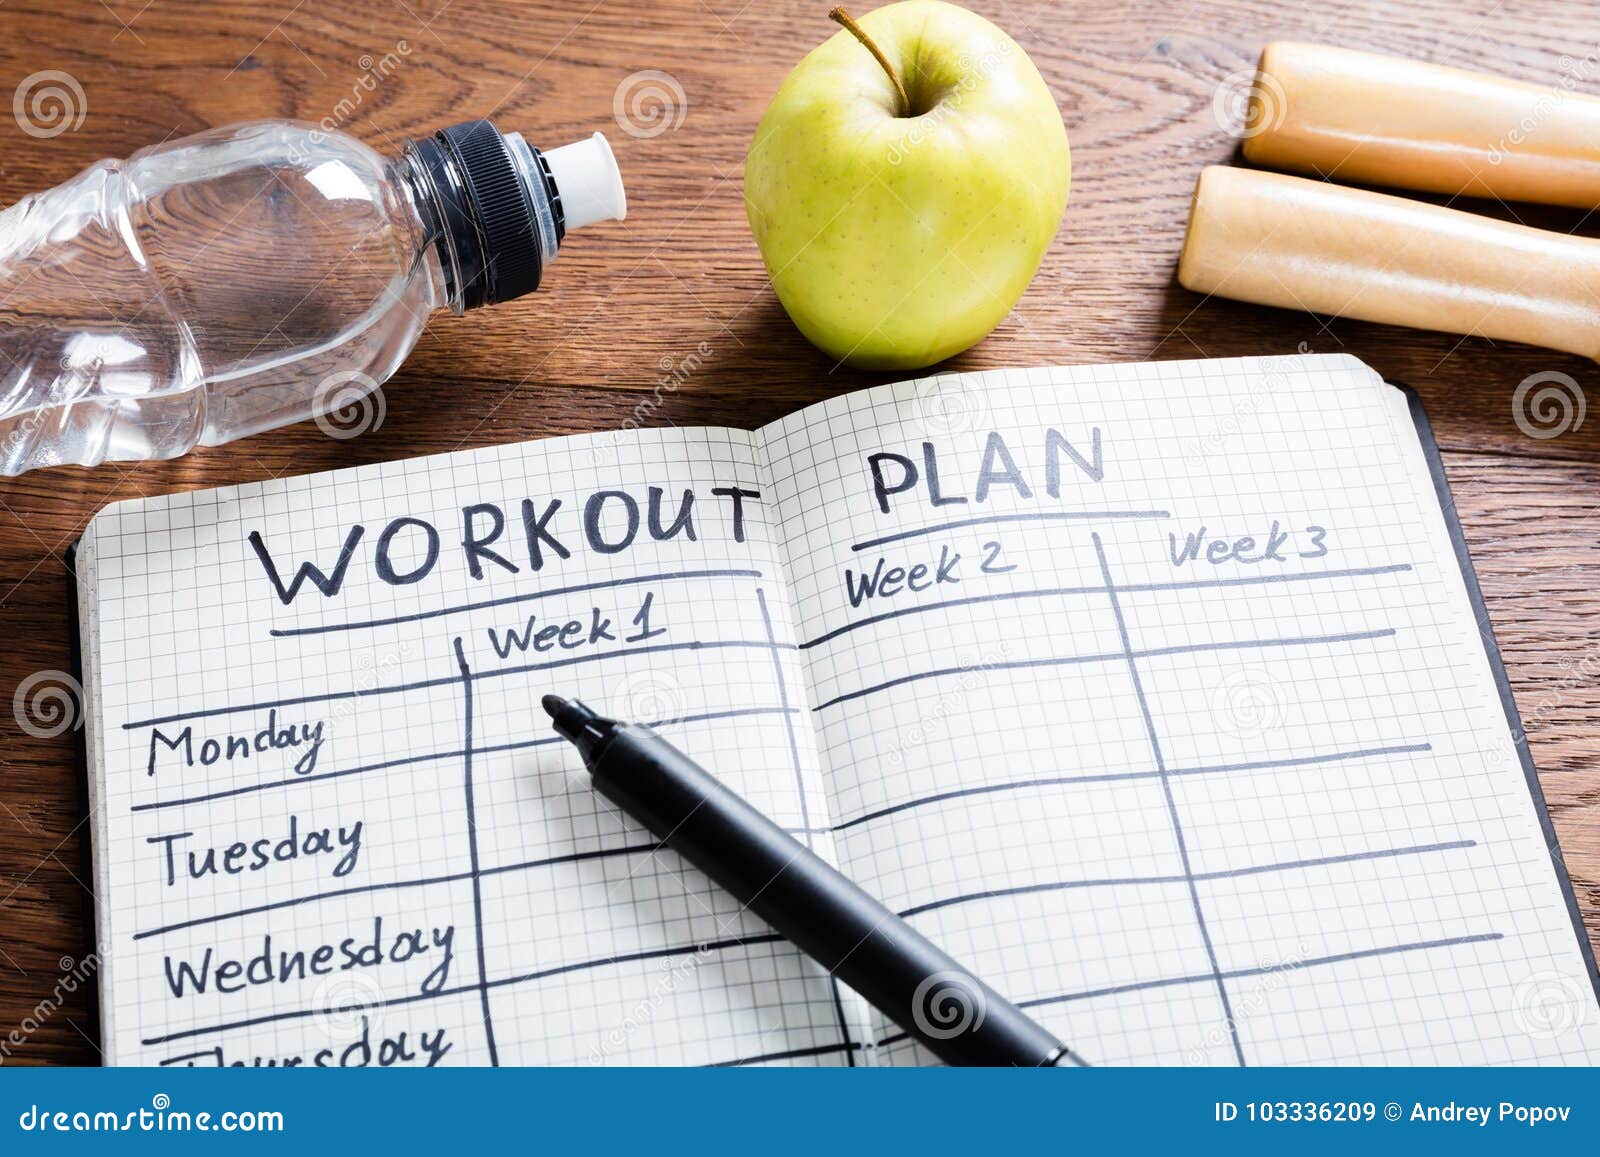 workout plan in notebook